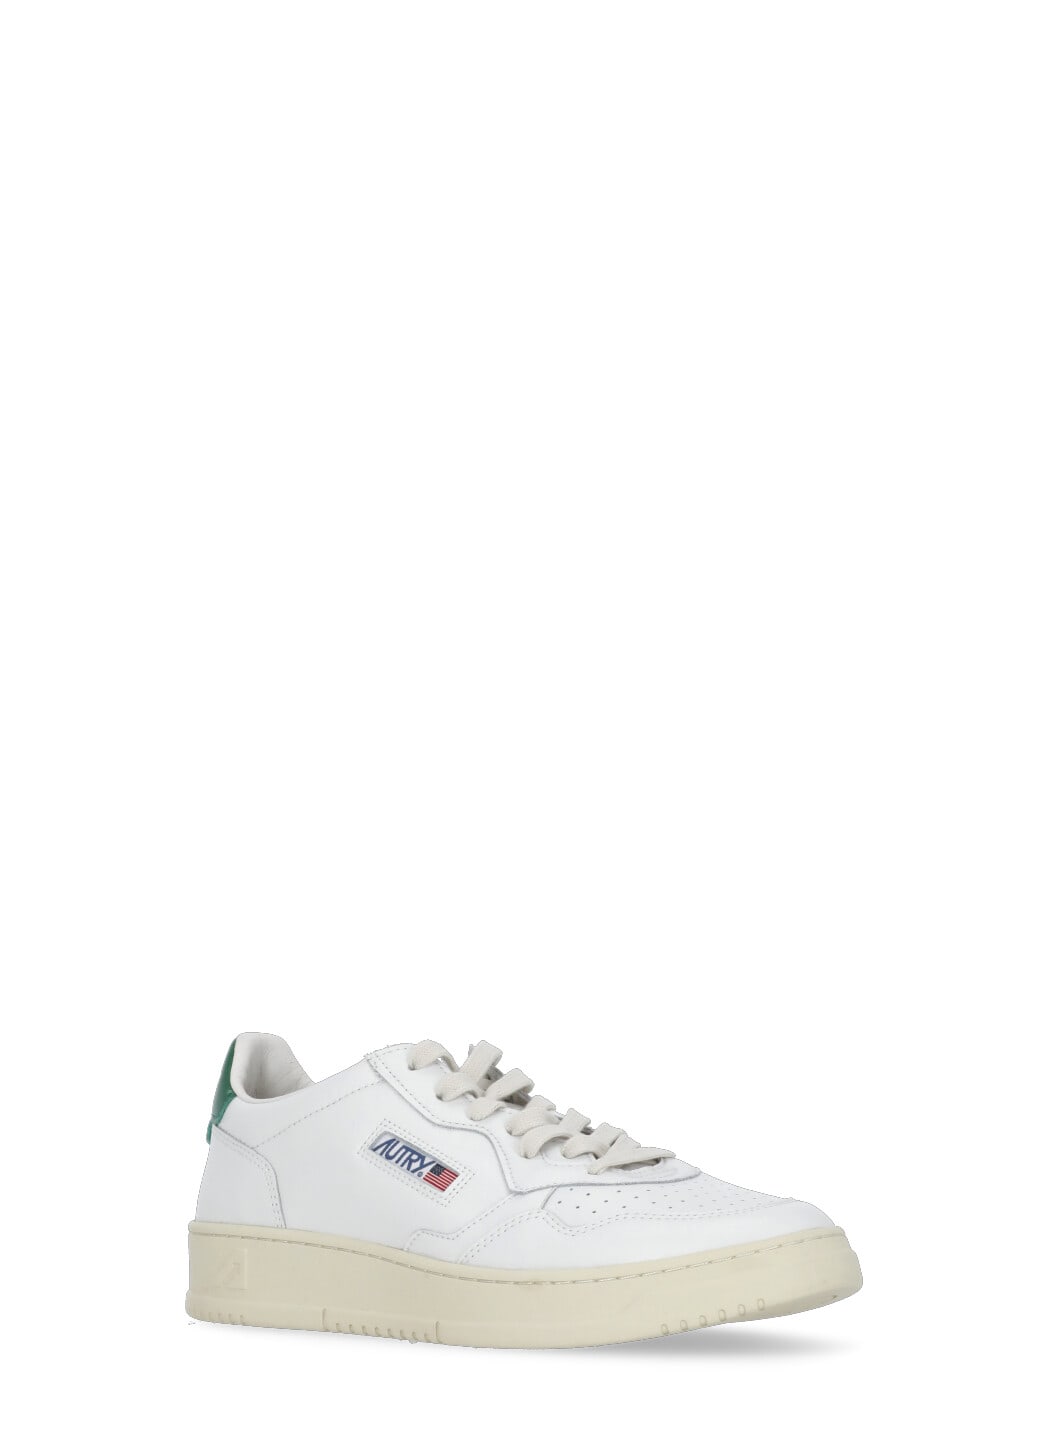 Shop Autry Aulm Ll20 Sneakers In White